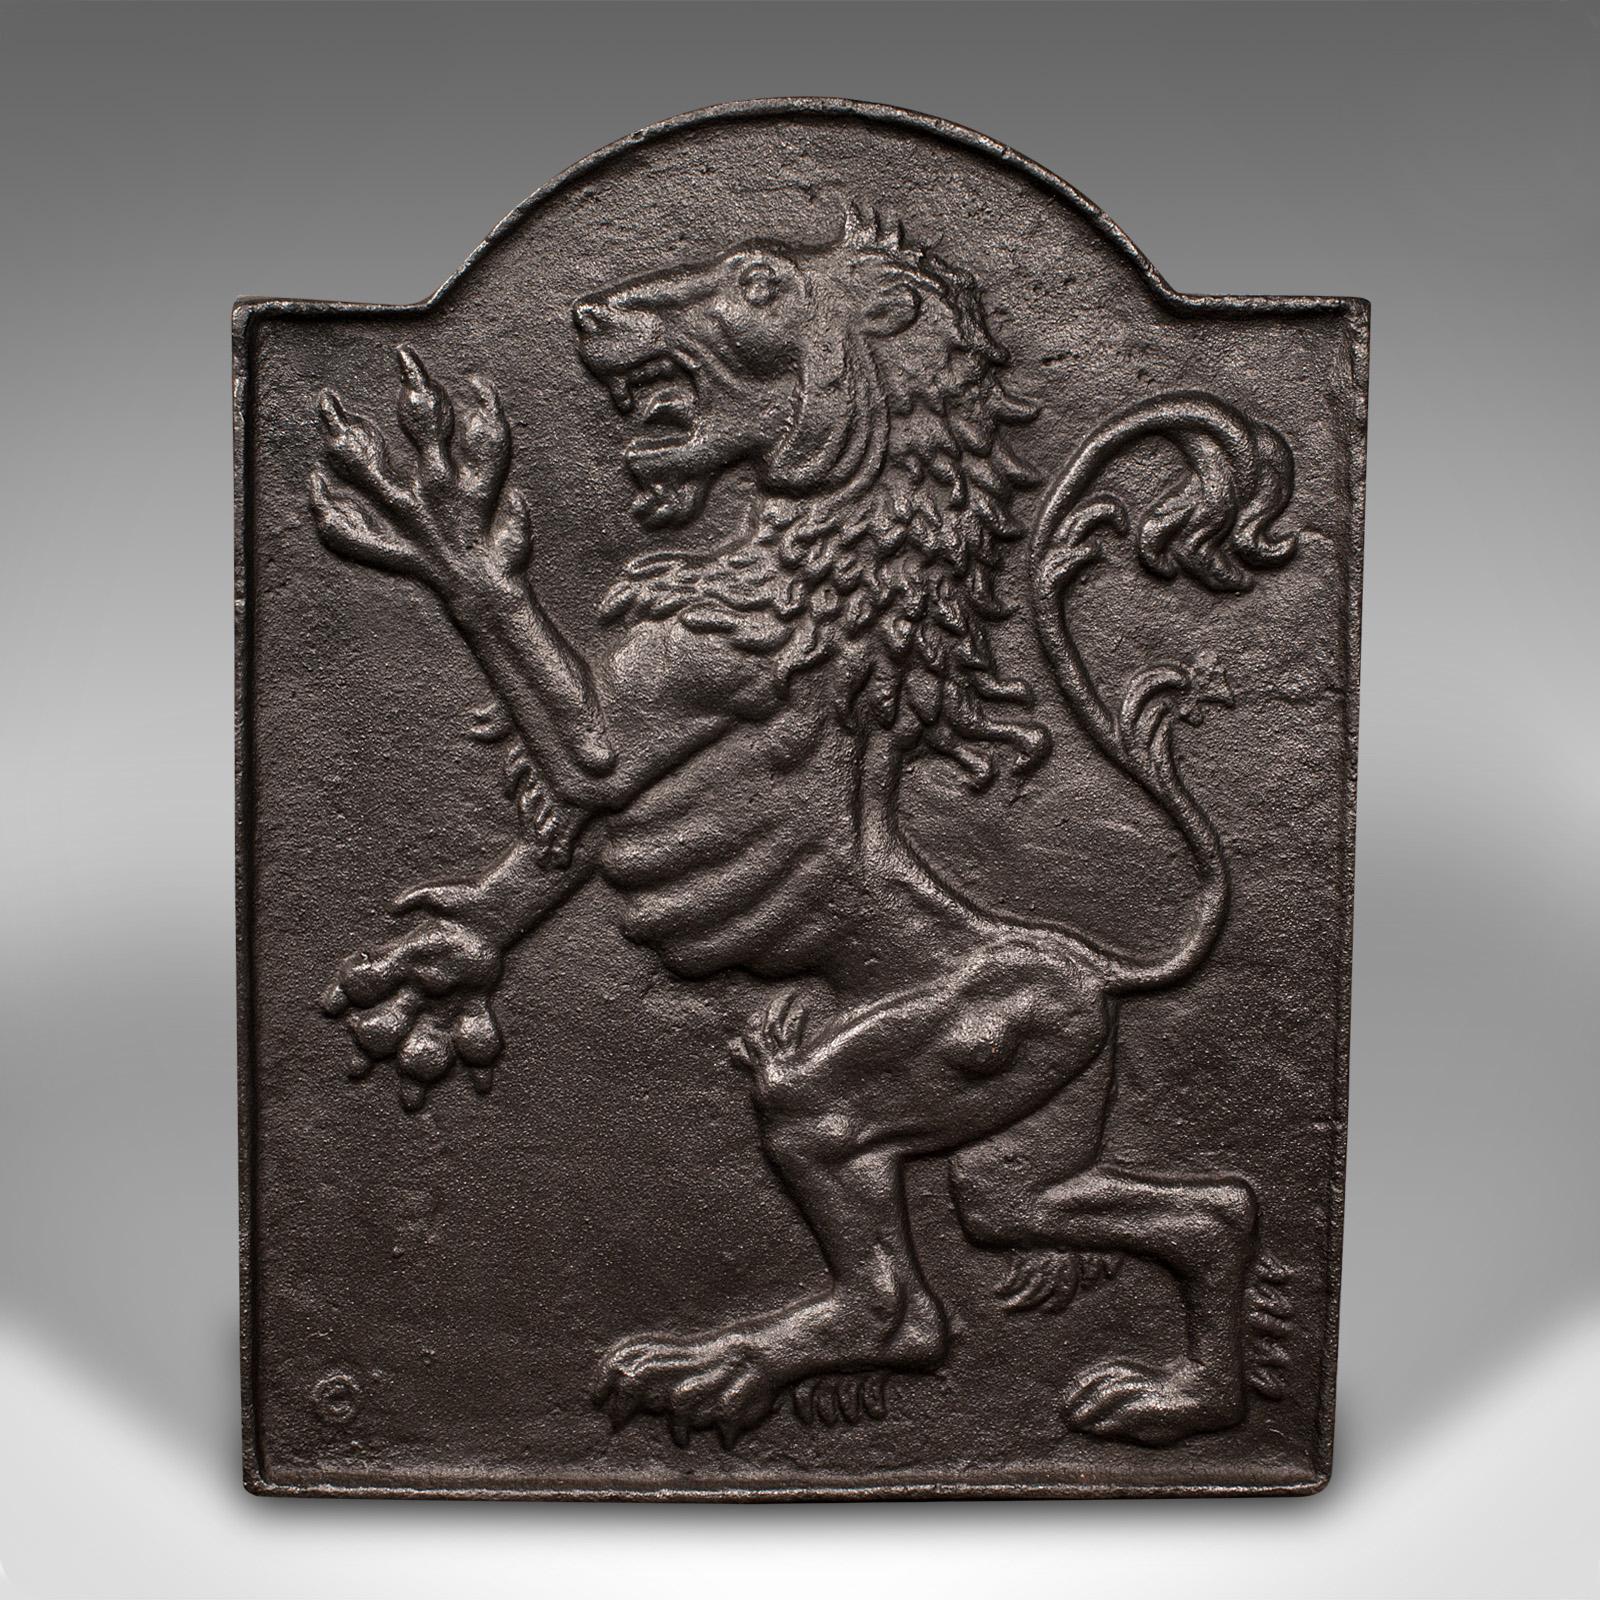 This is a small antique decorative fire back. An English, cast iron fireplace reflector with Lion Rampant relief, dating to the late Victorian period, circa 1900.

Appealing heraldic motif to this smaller fire back
Displays a desirable aged patina